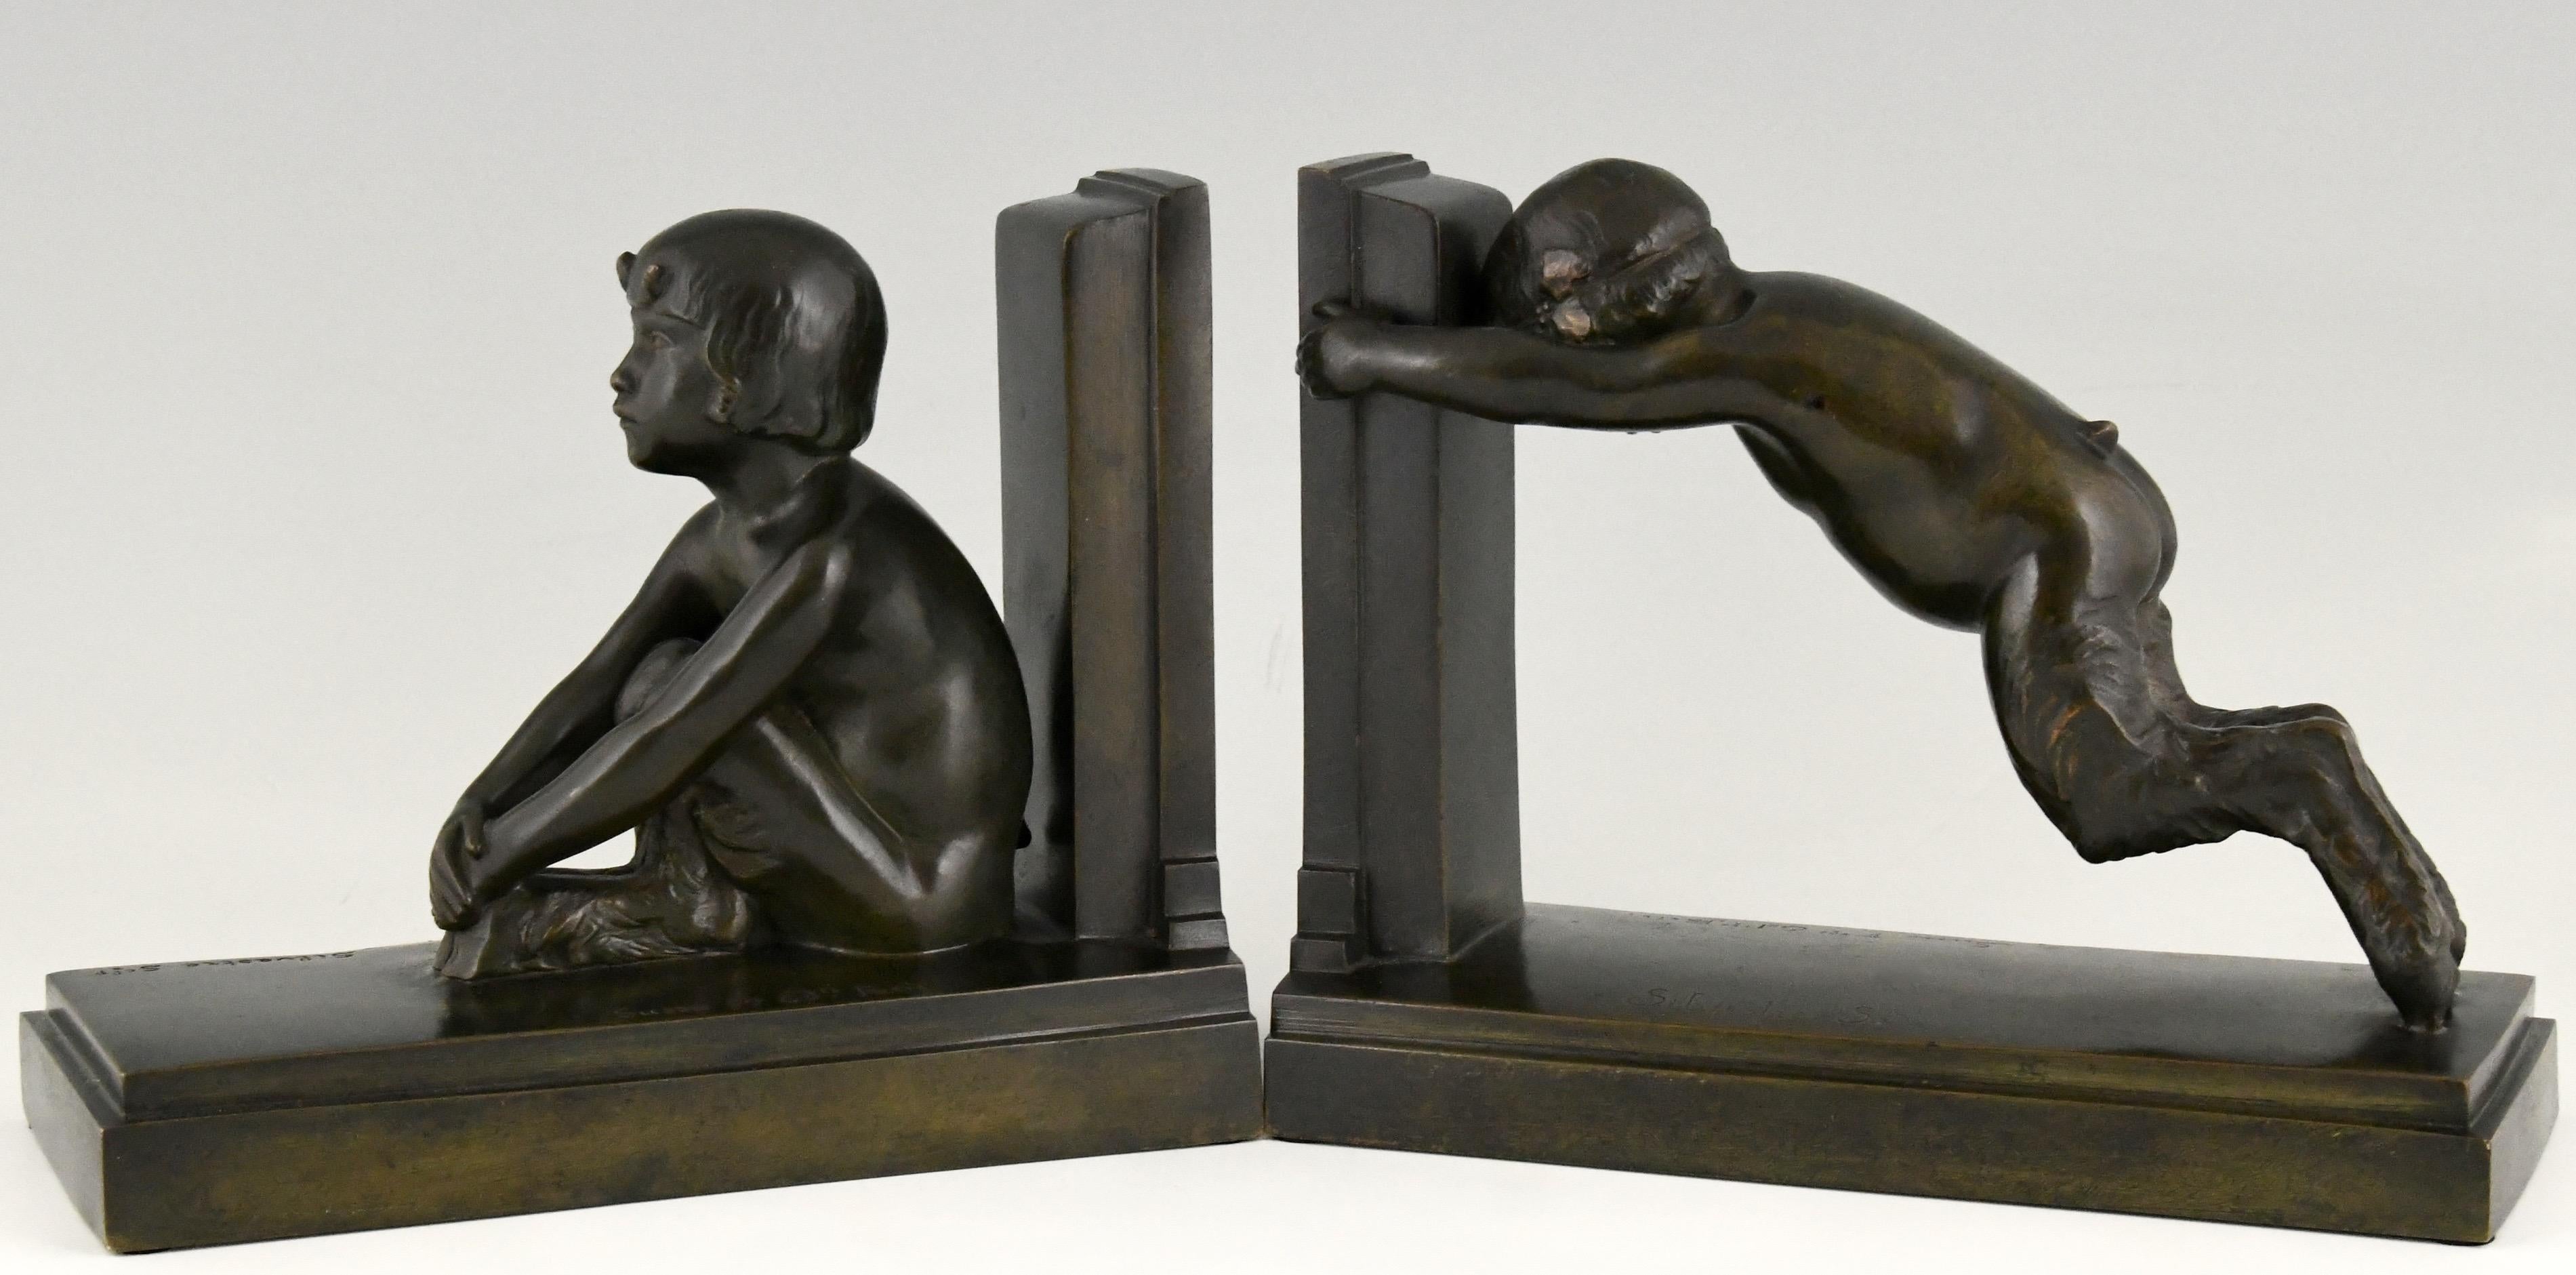 Tallest version of “Sit and push”, Art Deco bronze bookends boy and girl satyr. 
Signed by Paul Silvestre with Susse Freres founders' signature, France ca. 1920. Reduced version of the “Miroir d’eau” fountains in Paris and Lucerne.

The bookends